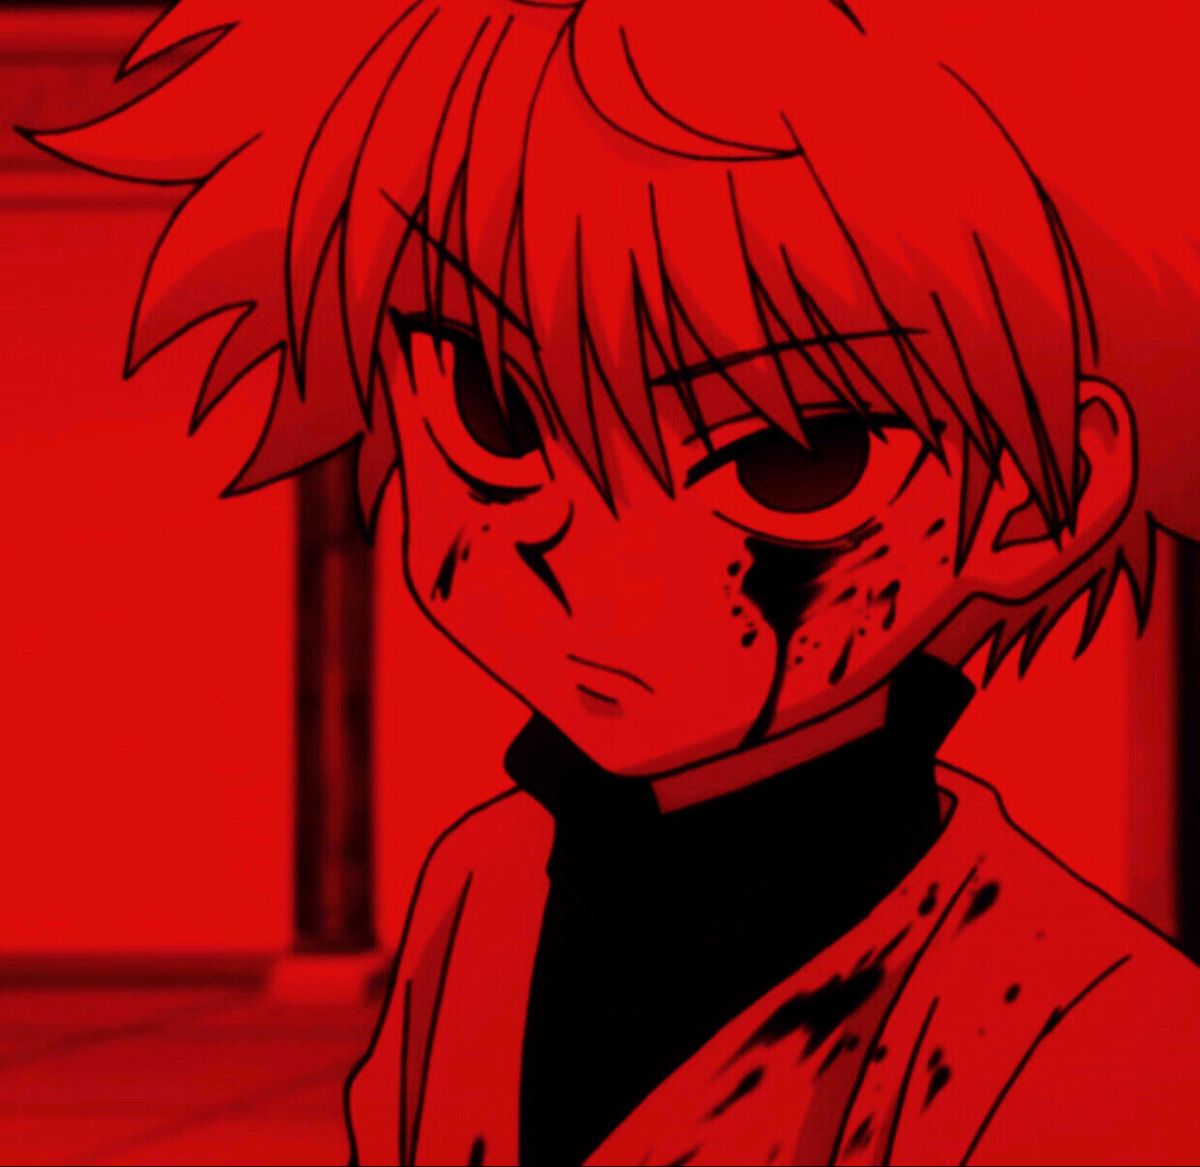 Killua red aesthetic. Red aesthetic grunge, Red aesthetic, Red icons:)